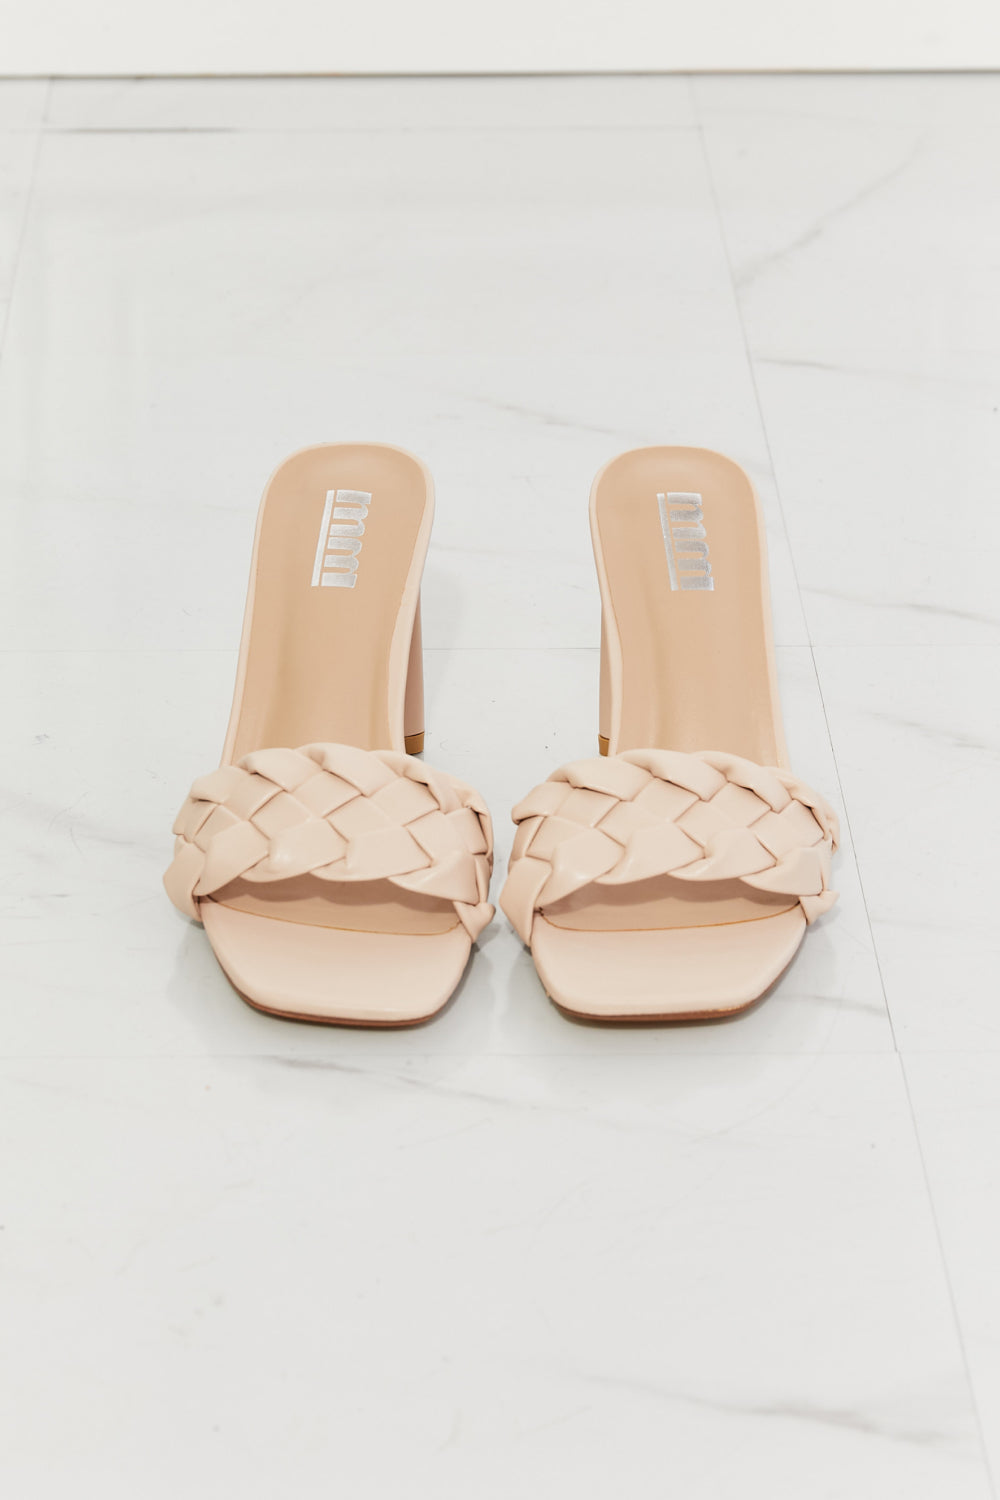 MMShoes Top of the World Braided Block Heel Sandals in Beige